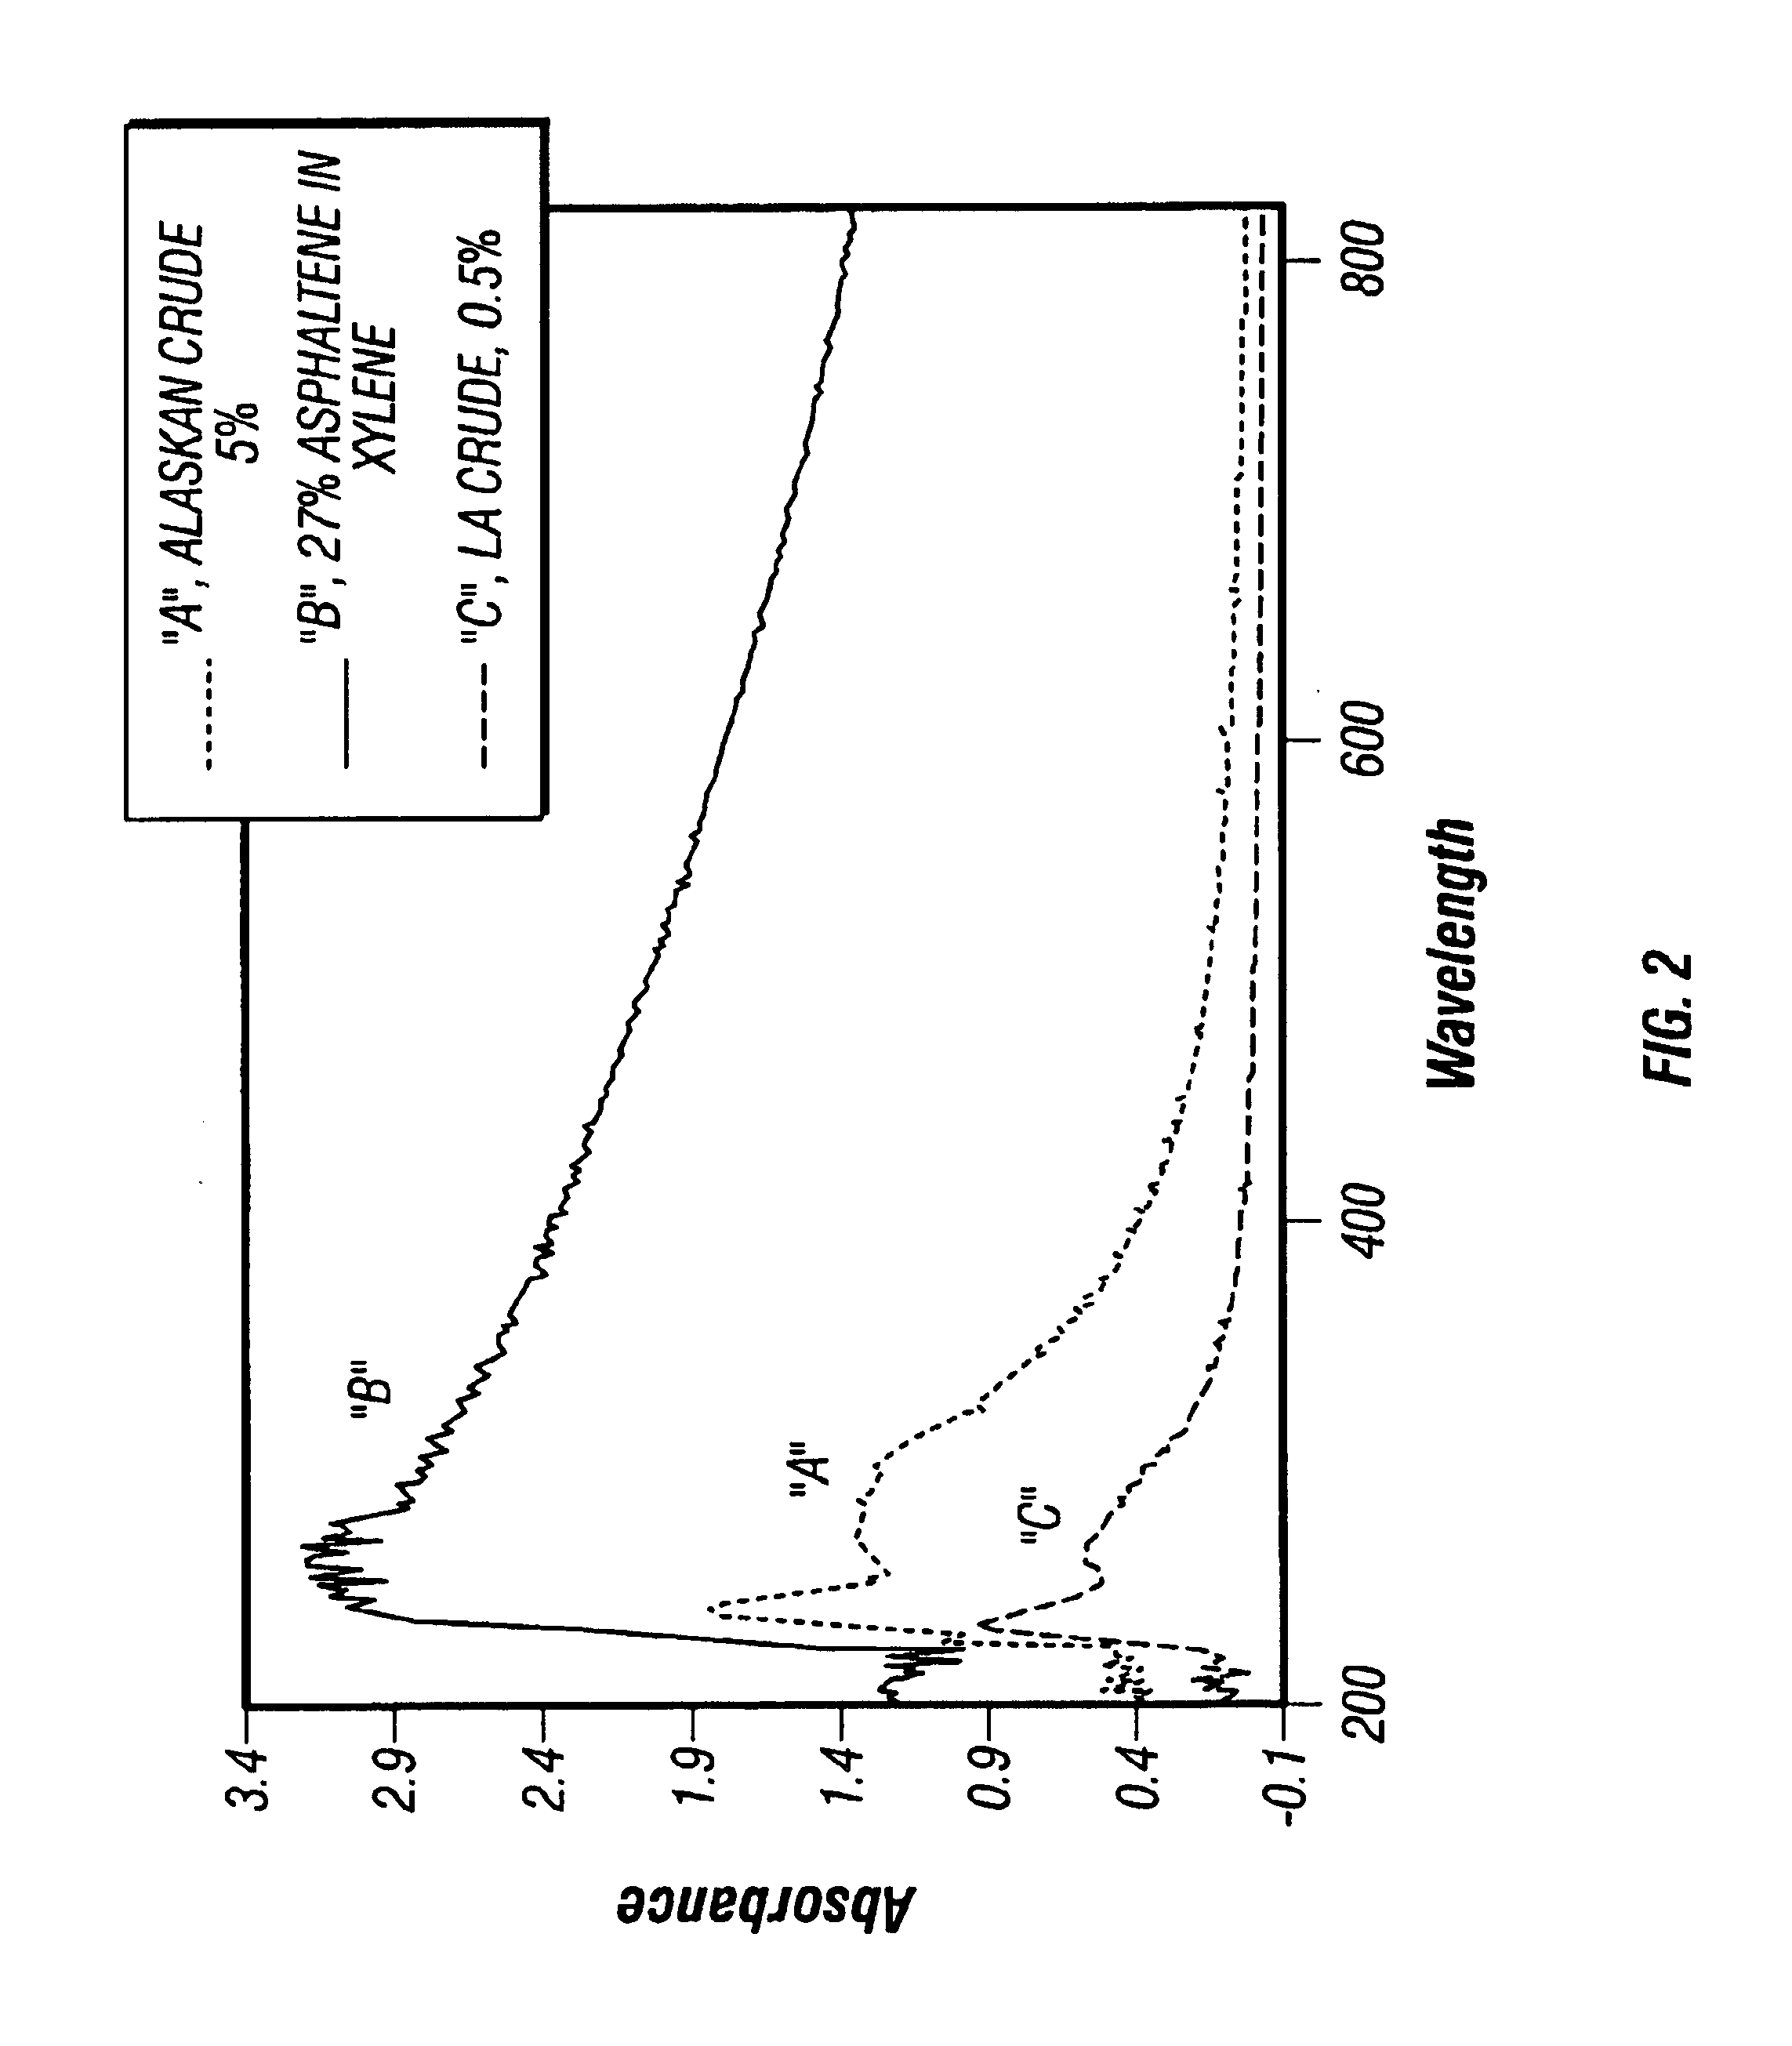 Method for storing and transporting crude oil